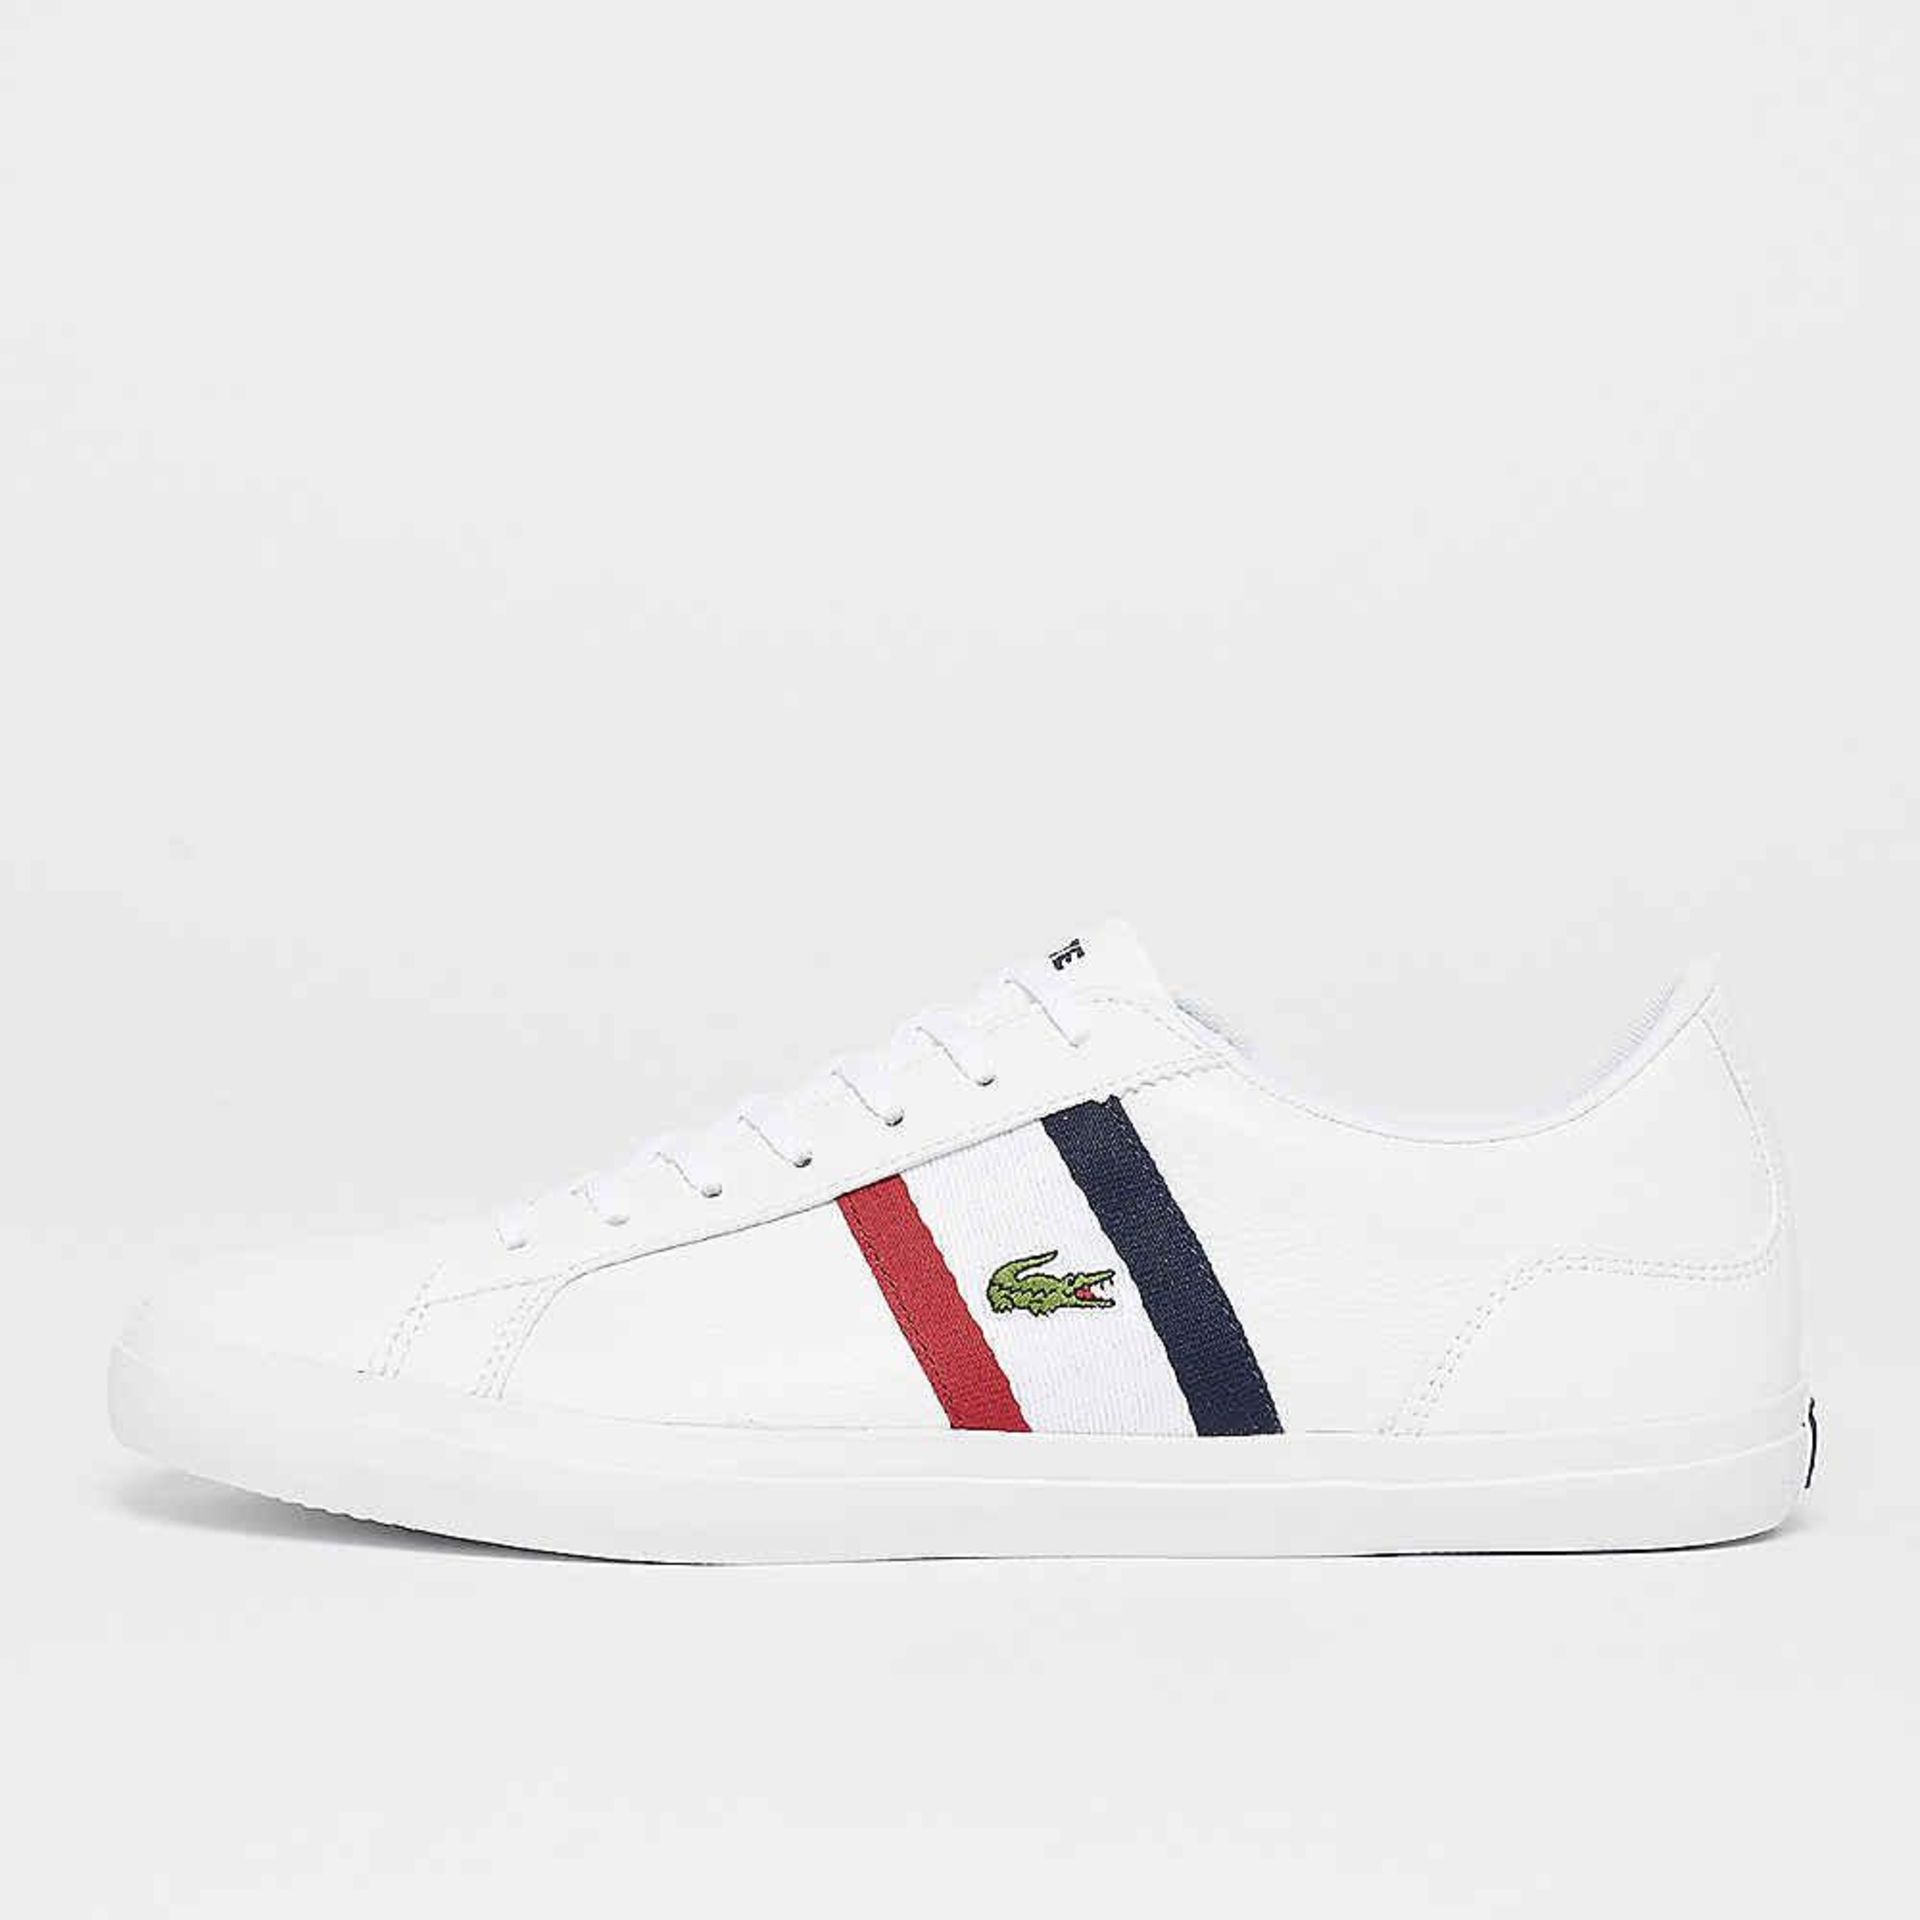 + VAT Brand New Lacoste Trainers UK Size 7.5 - White Navy Red - Leather & Sythetic - EU Size 41 -